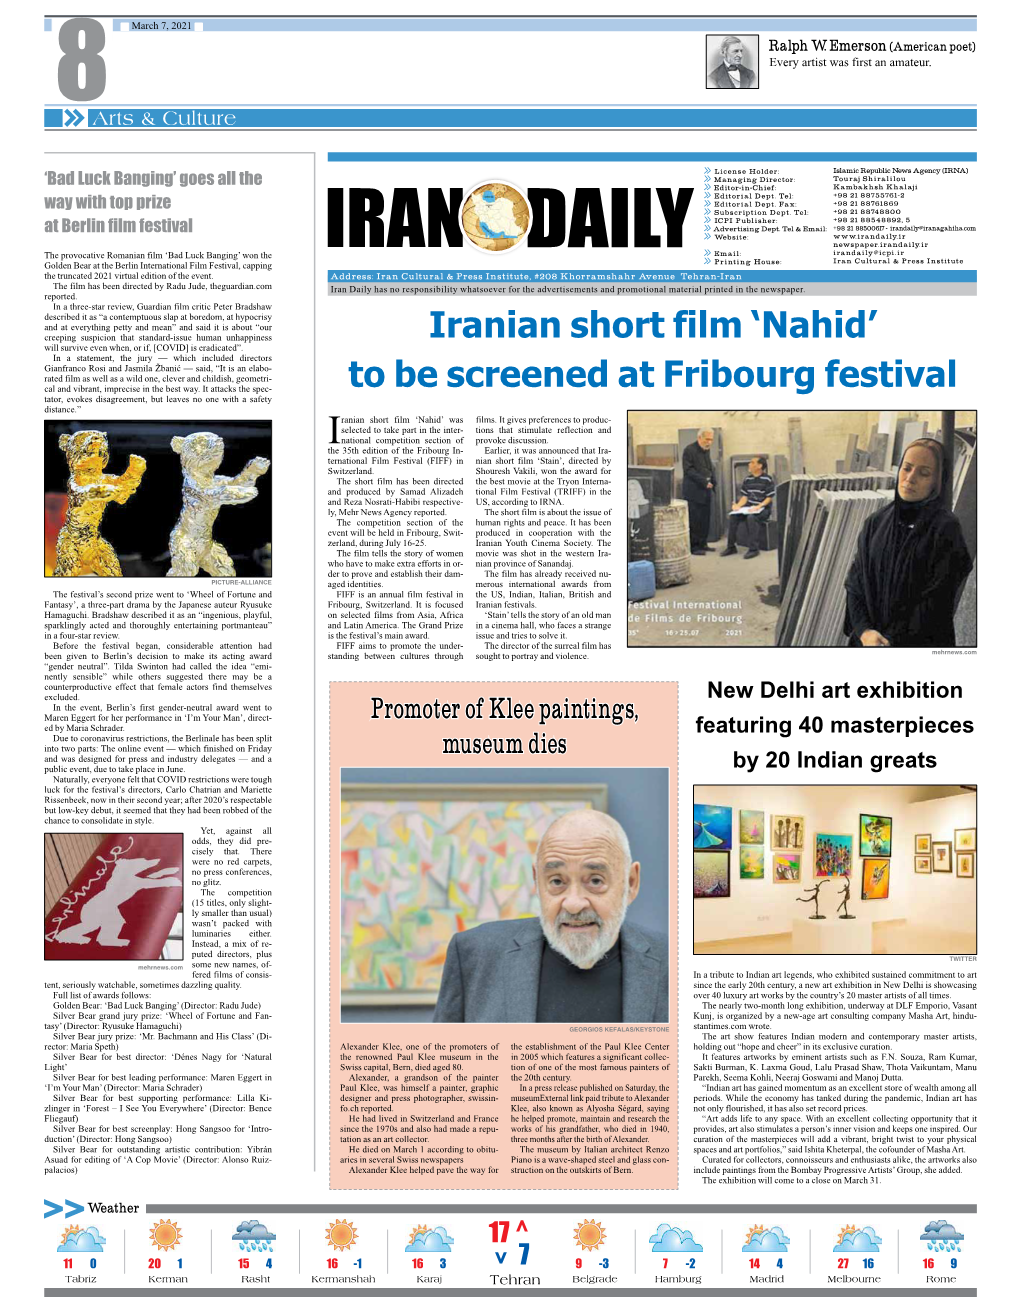 Iranian Short Film 'Nahid' to Be Screened at Fribourg Festival